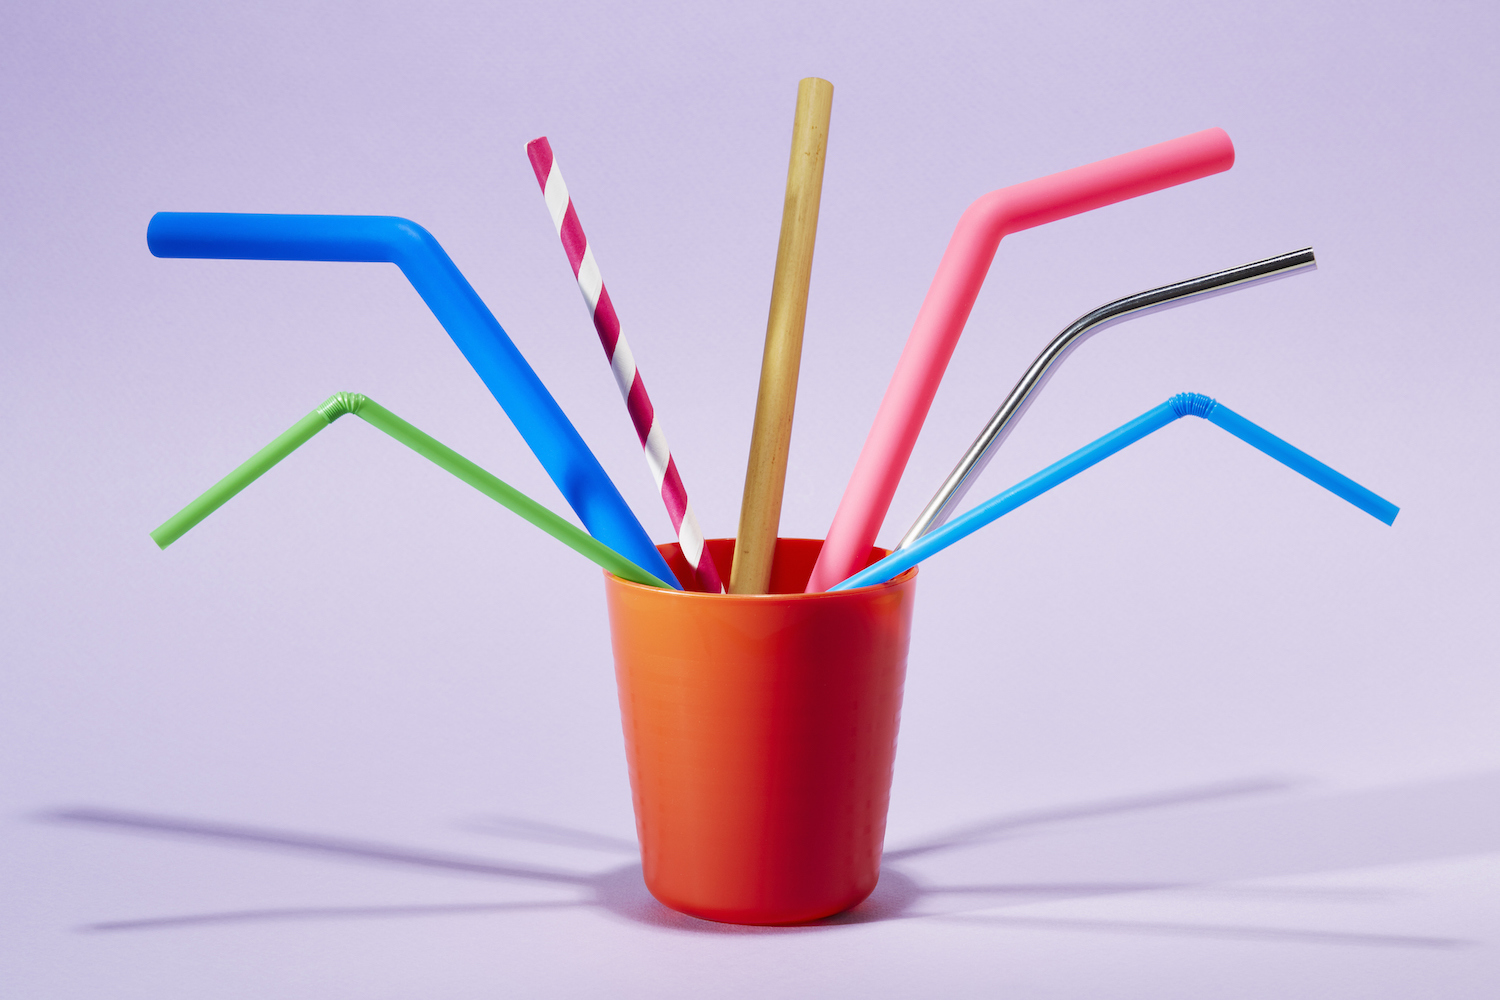 Seven different drinking straws in a cup